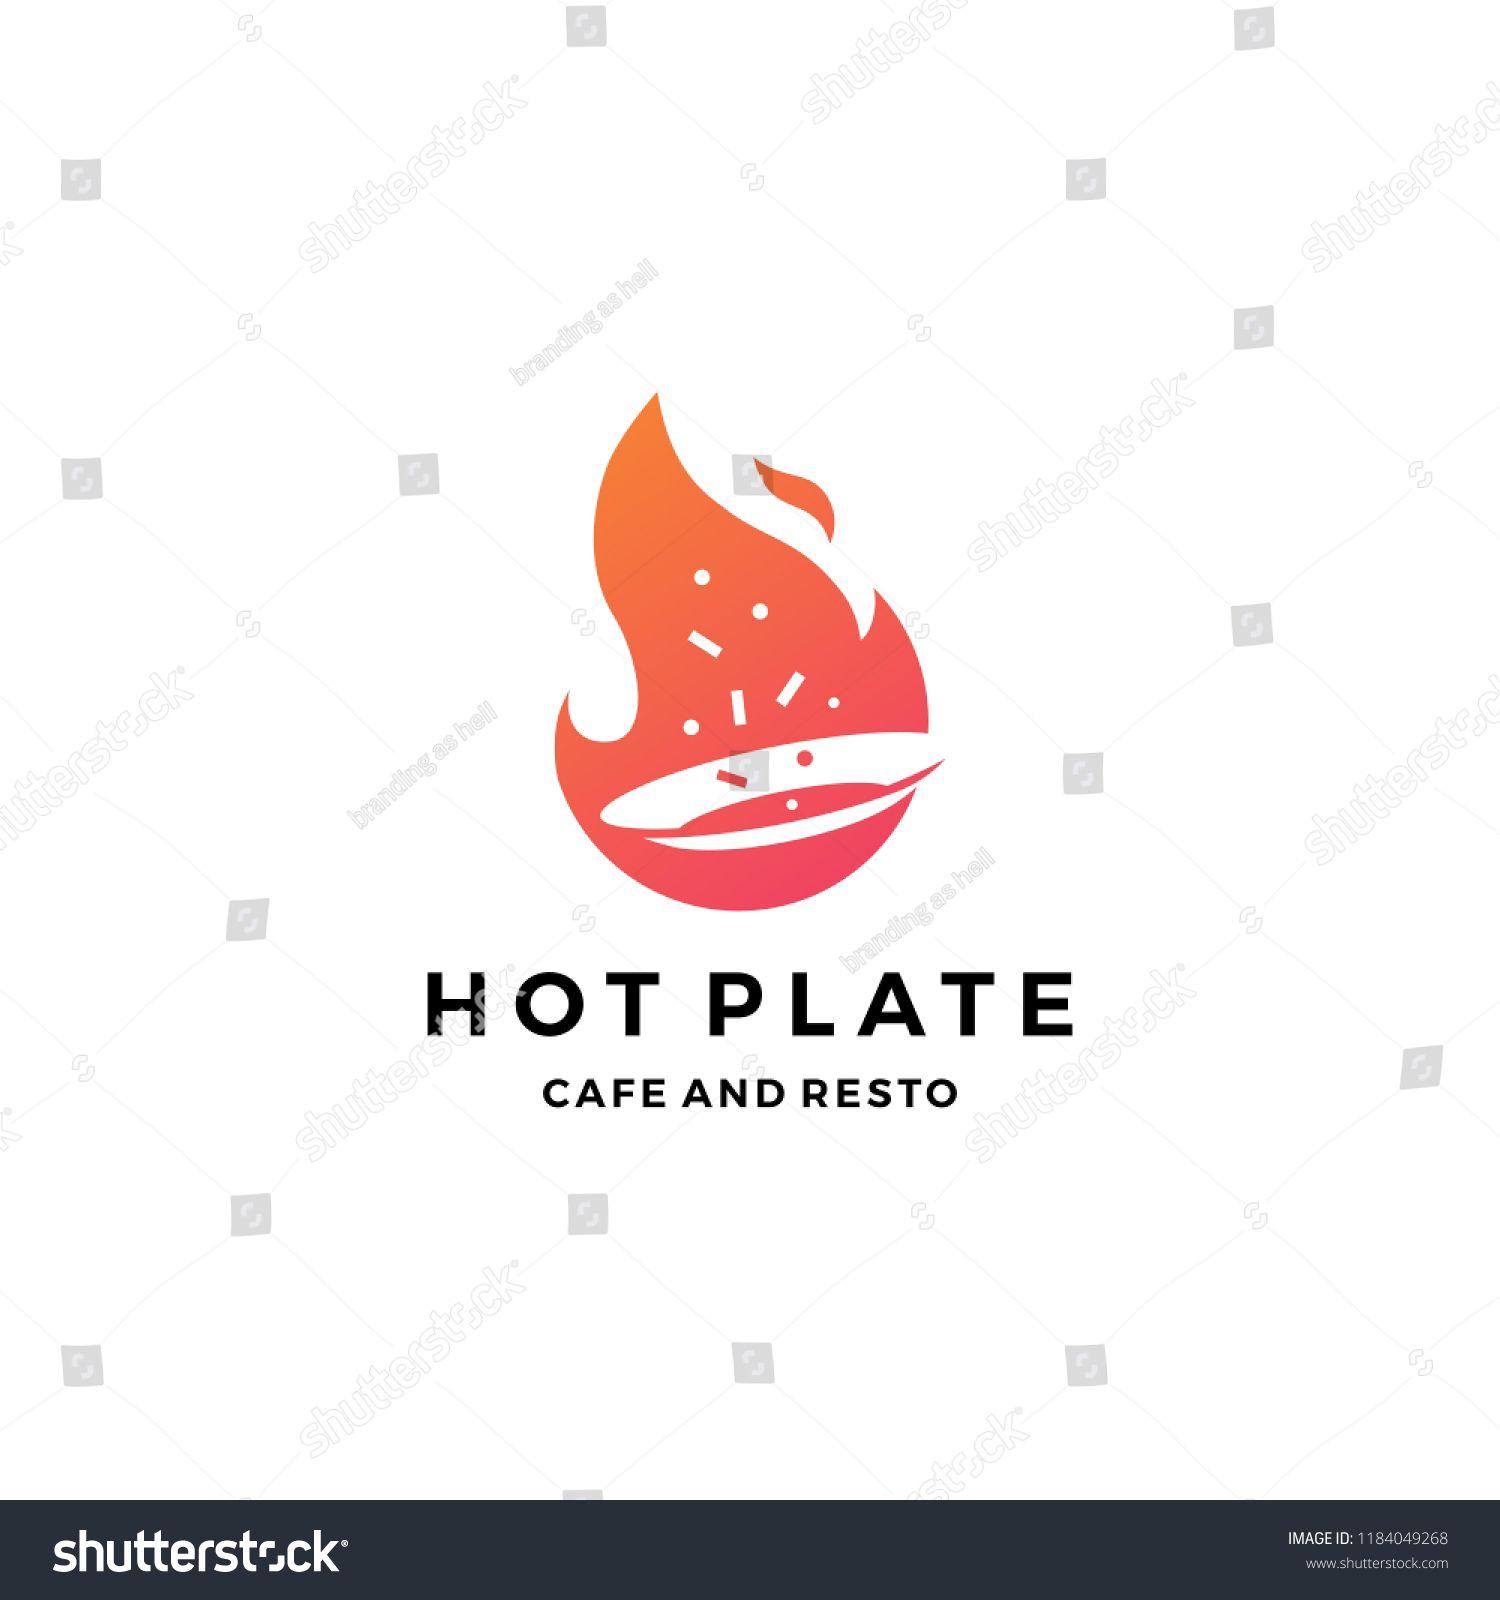 Burner Logo - fire flame hot plate logo icon #plate, #hot, #cooking, #food ...